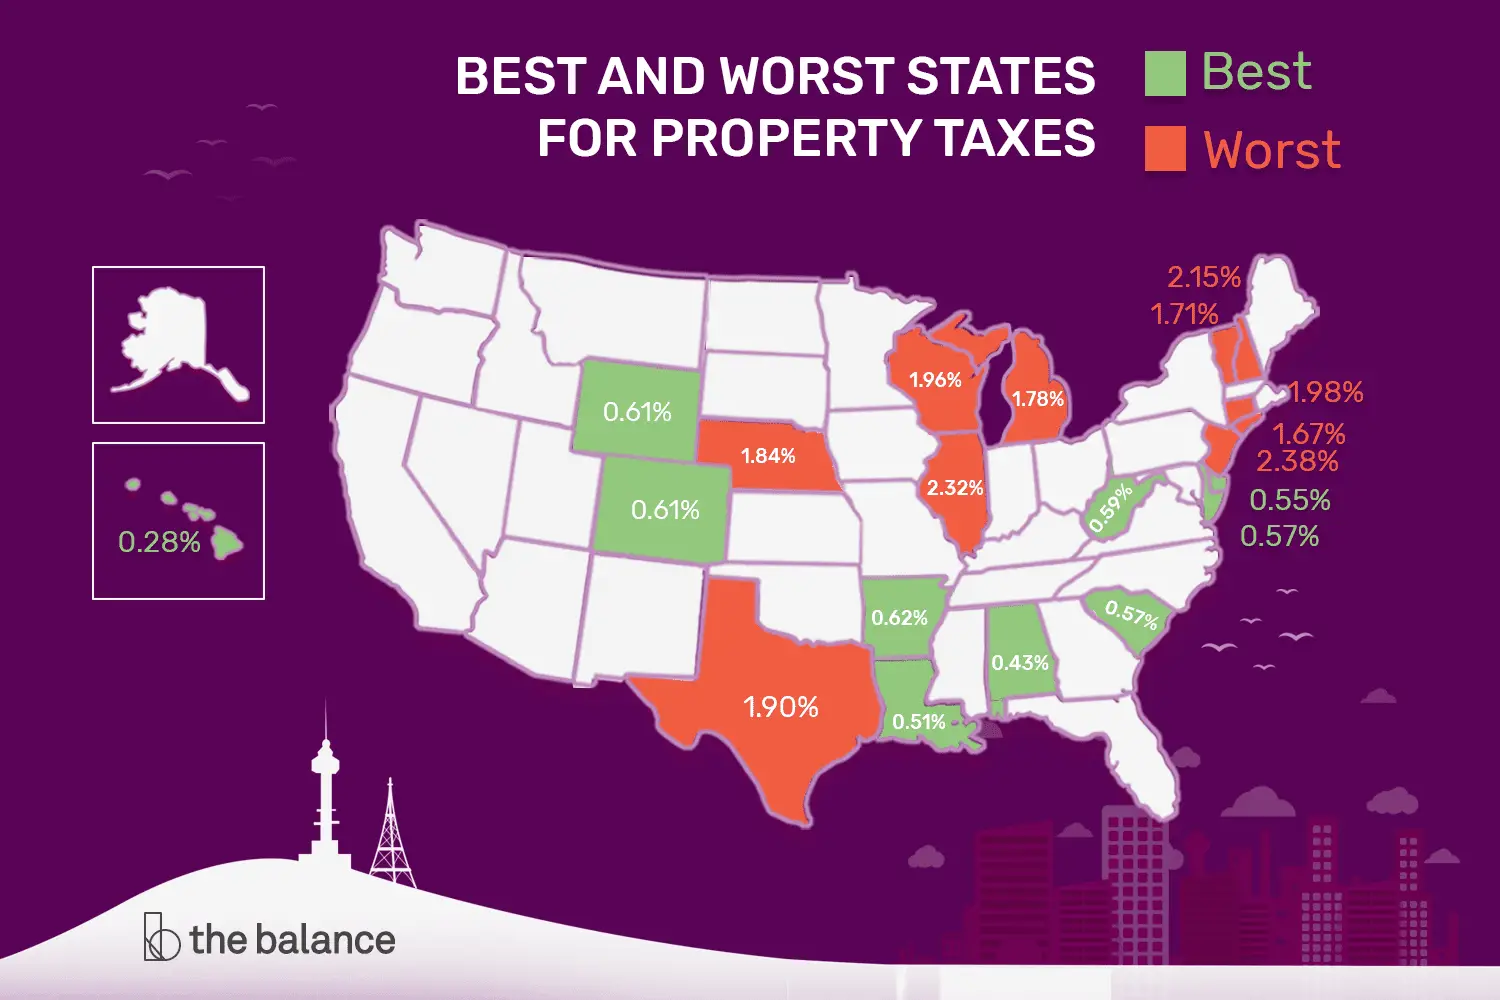 The 10 Best and 10 Worst States for Property Taxes